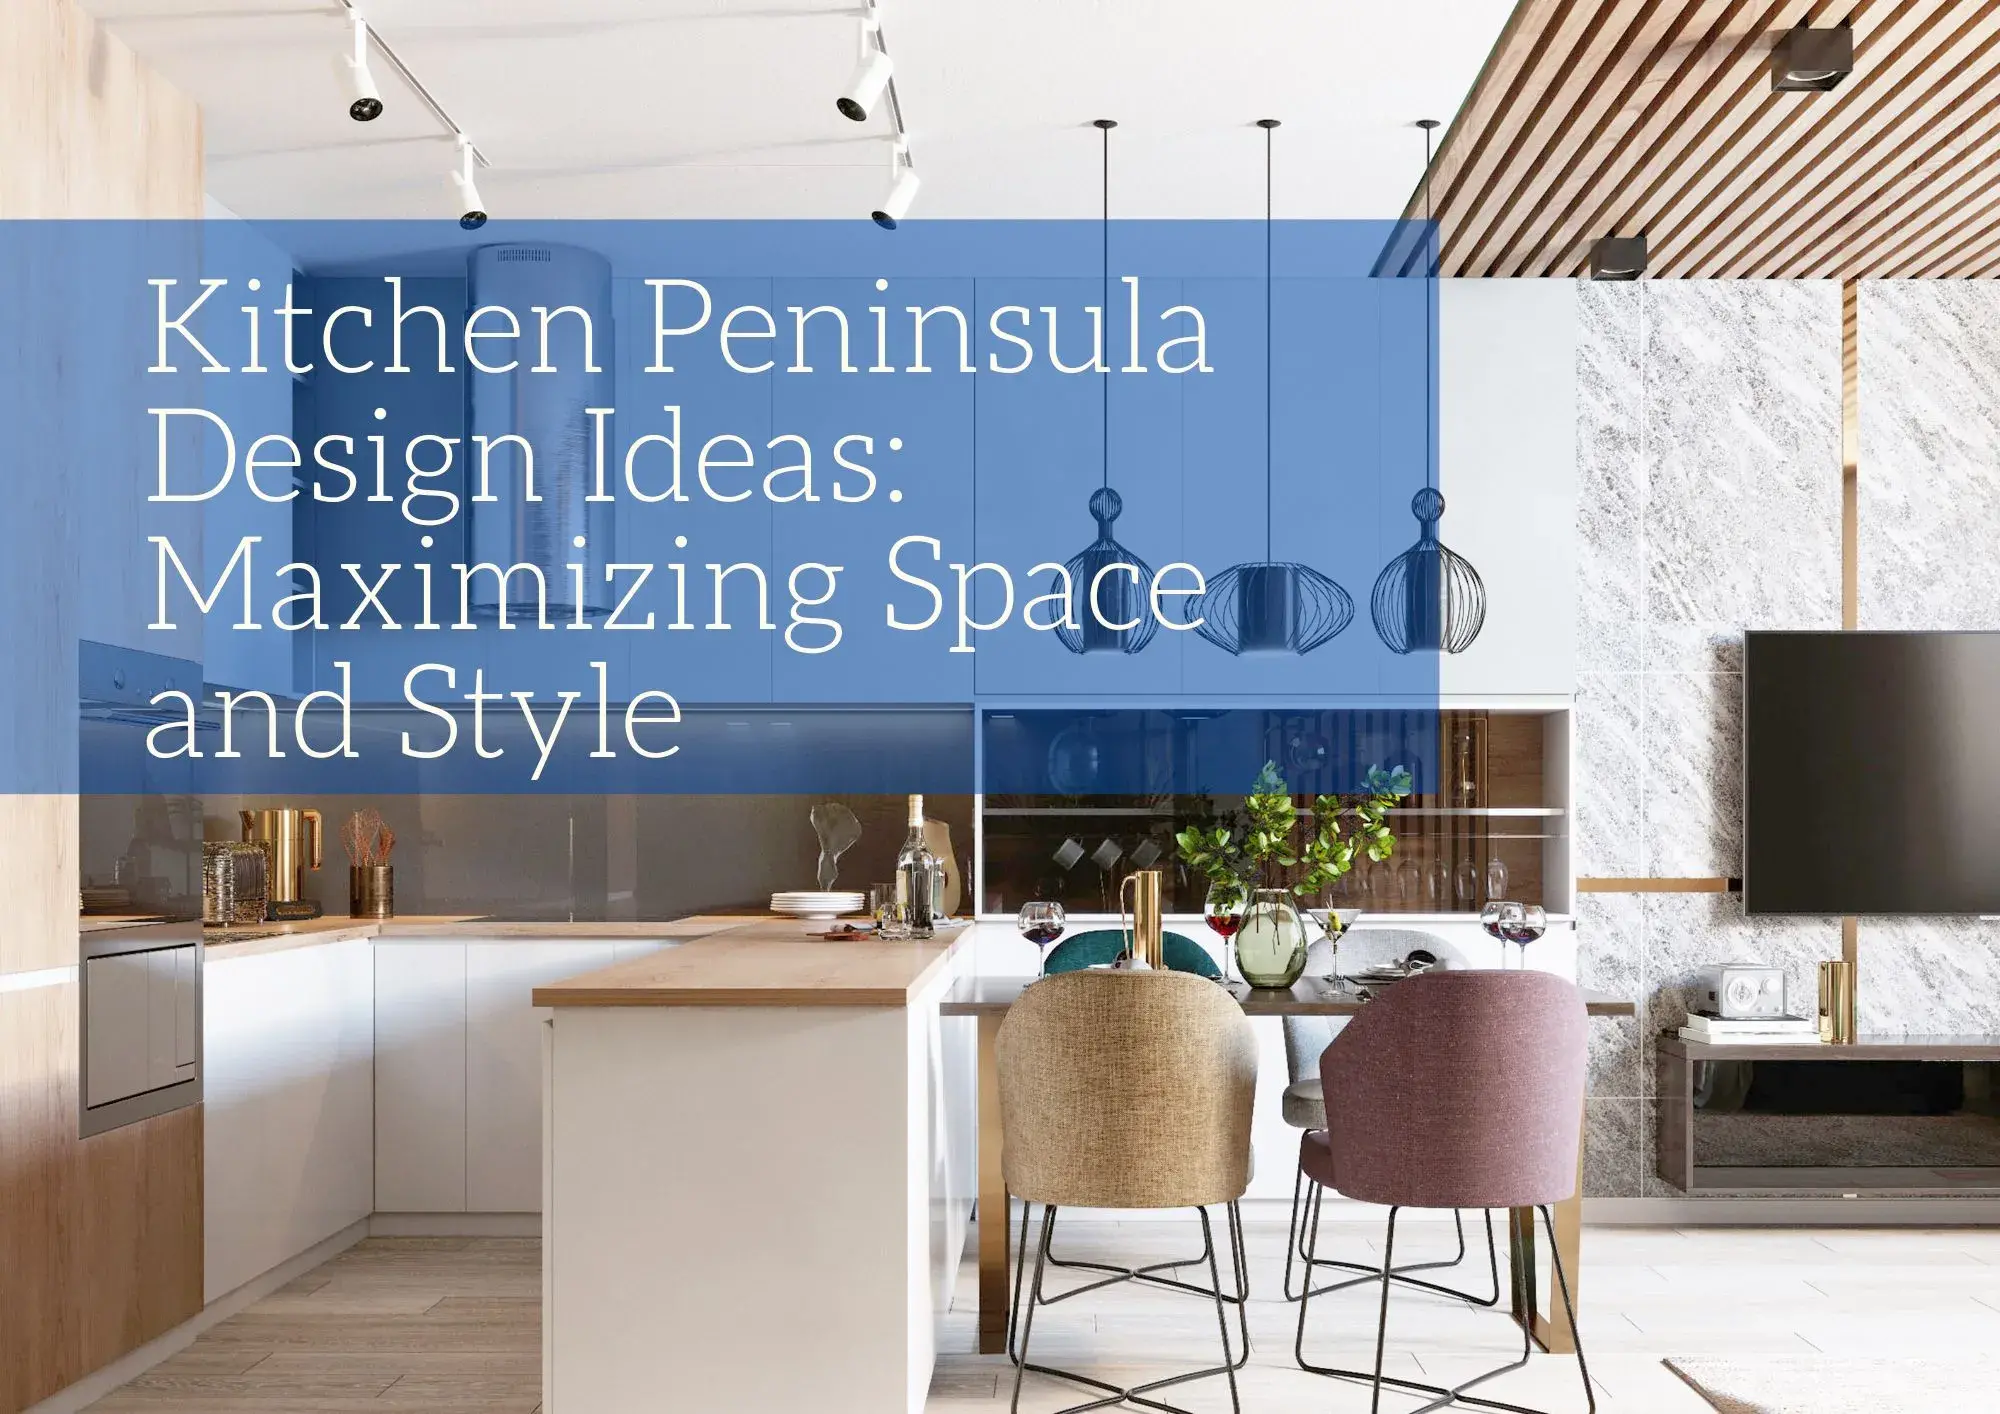 Maximizing Space and kitchen style